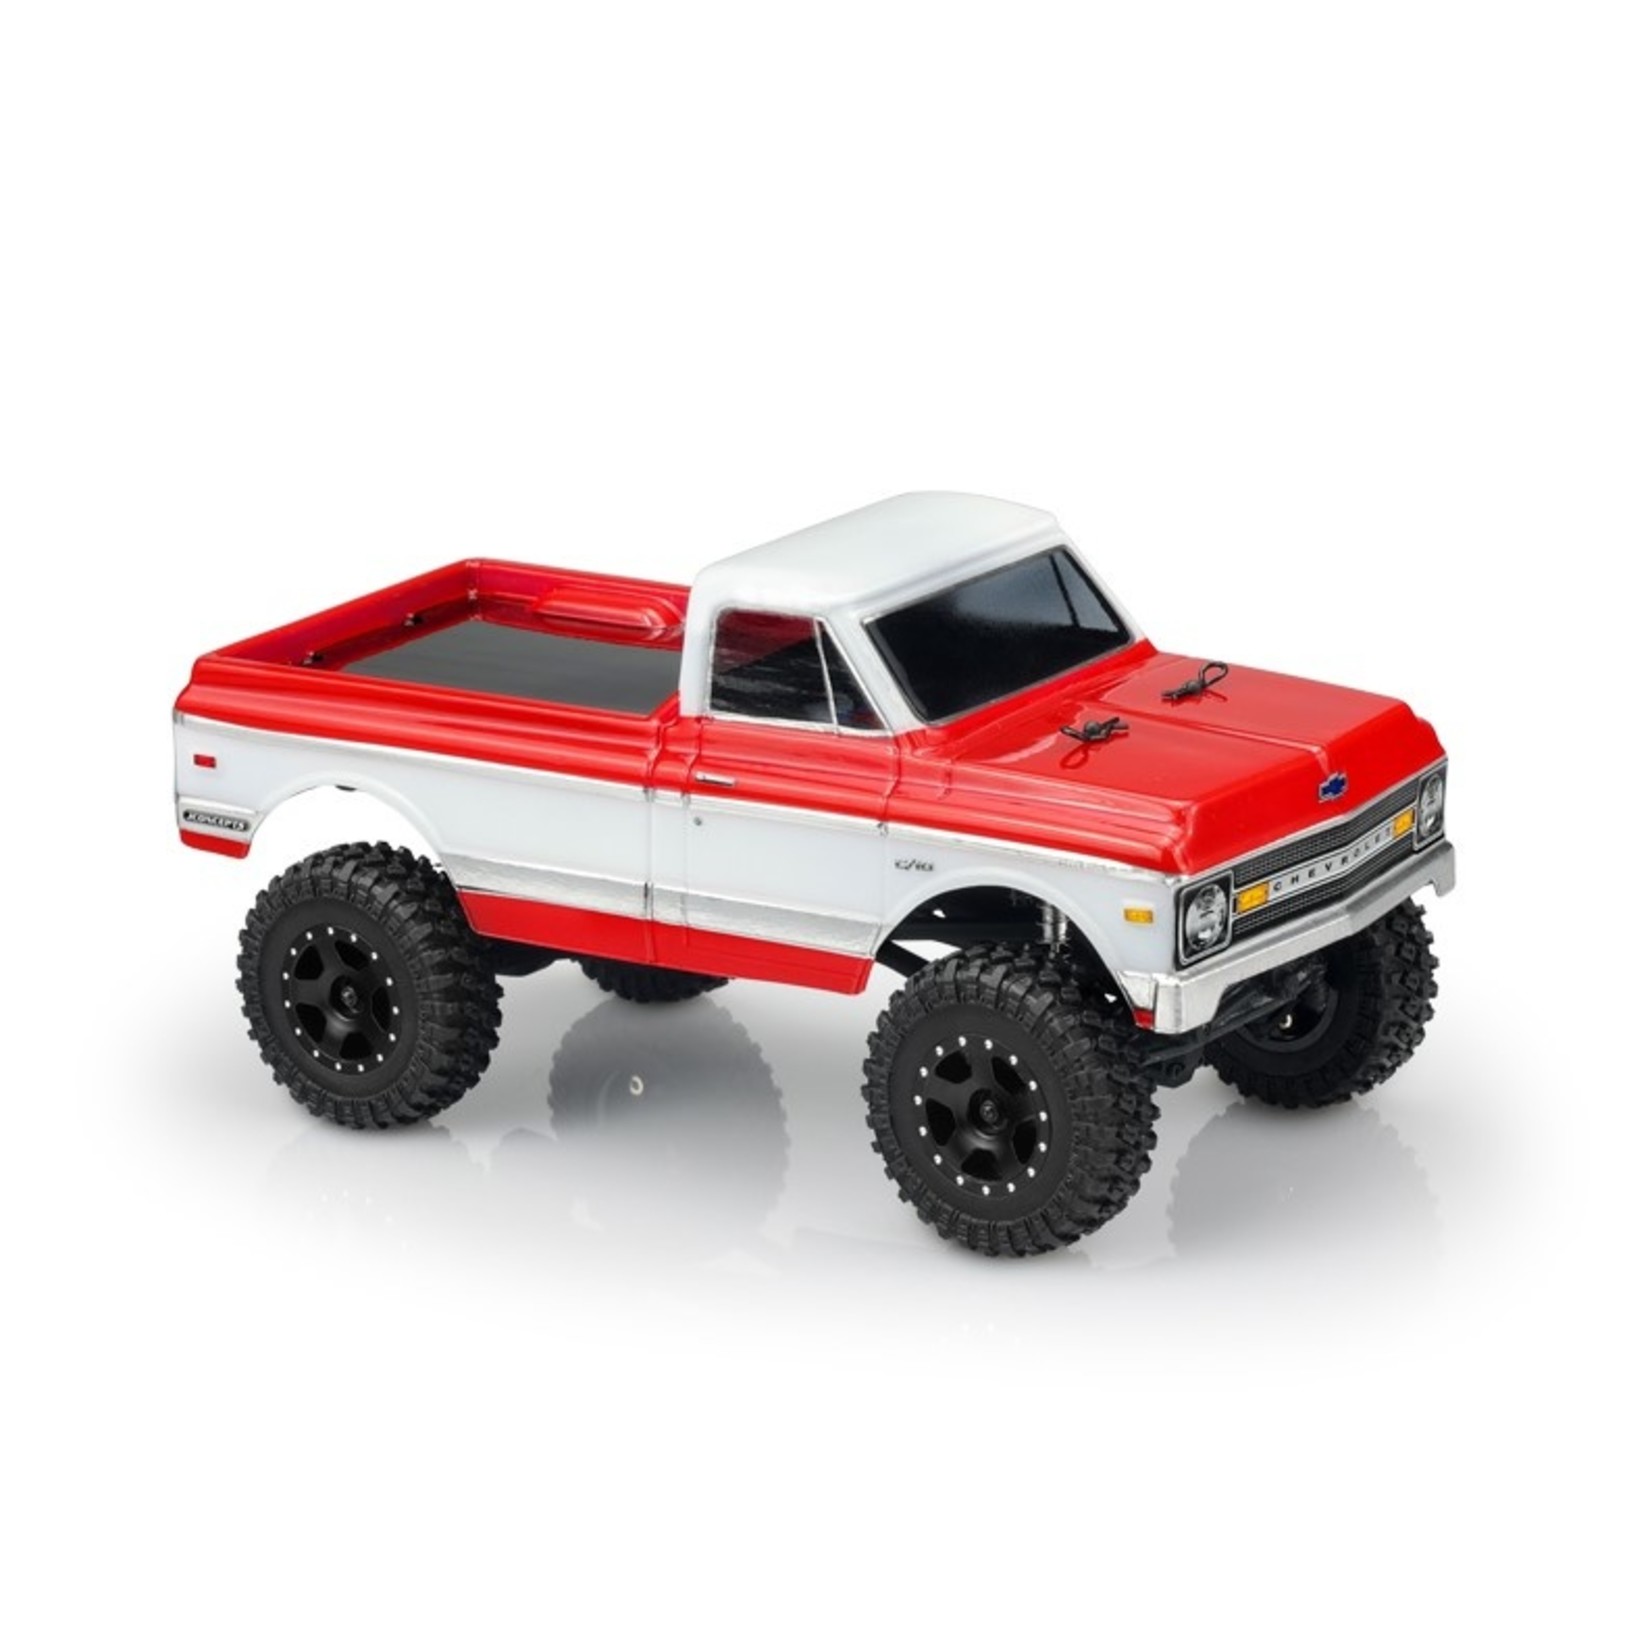 J Concepts JCO0445 - 1970 Chevy K10 Body, for Axial SCX24